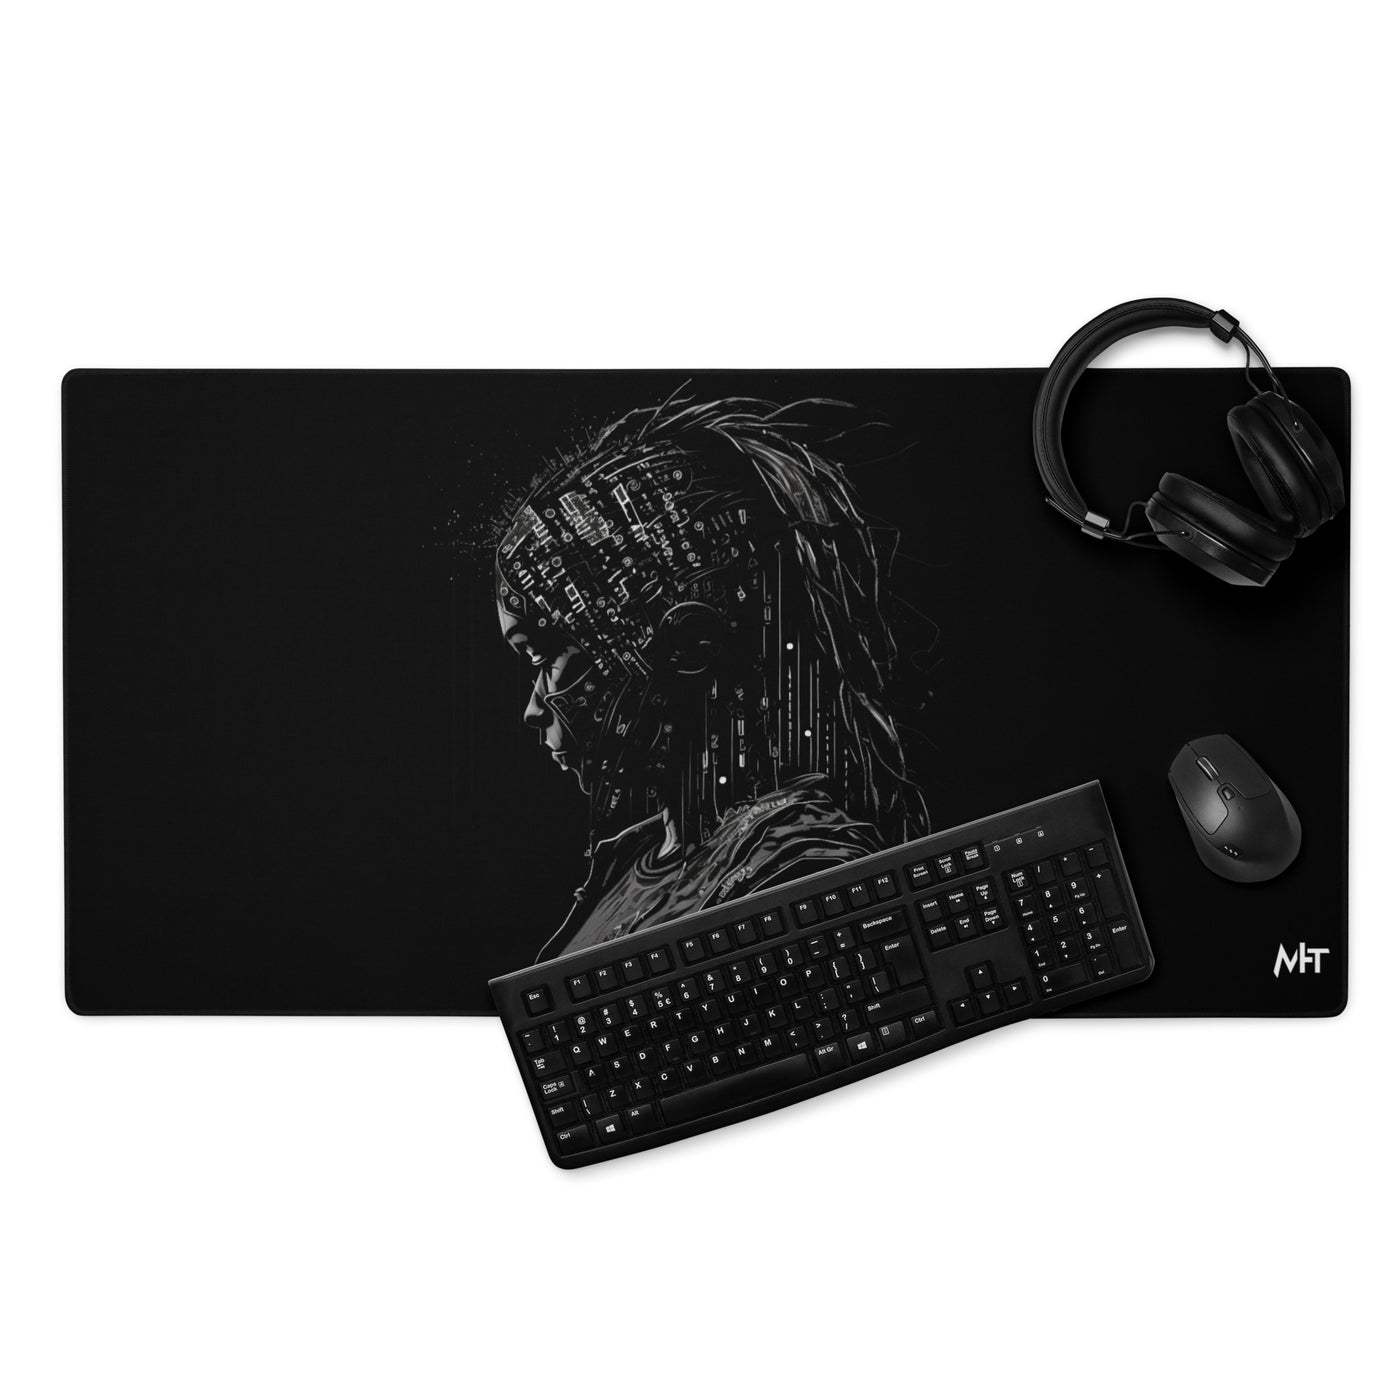 Cyberware assassin v38 - Gaming mouse pad